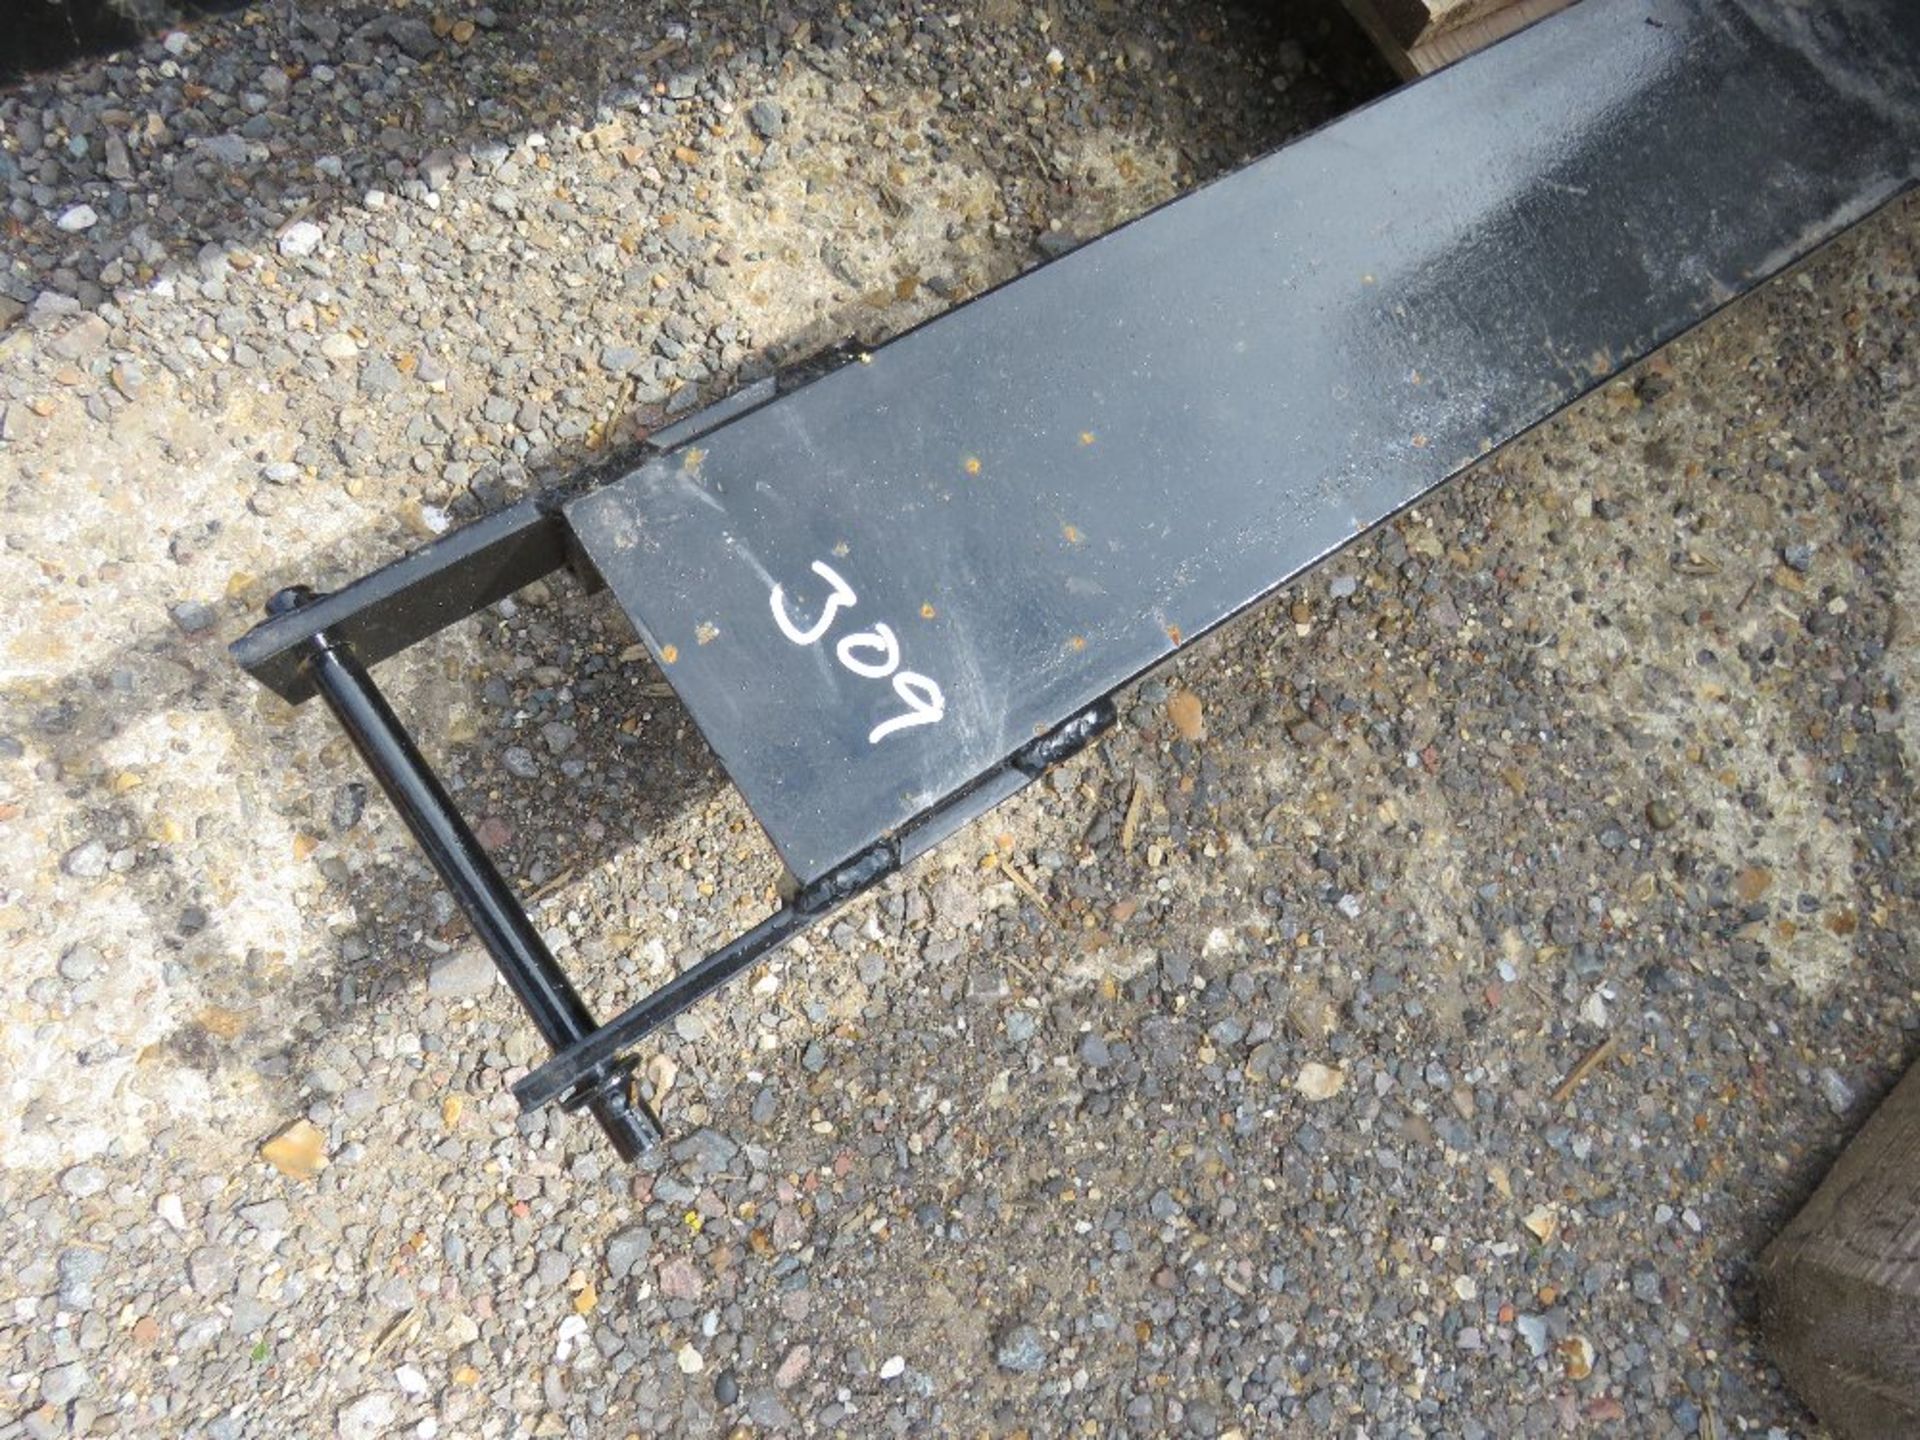 PAIR OF FORKLIFT EXTENSION TINES / SLEEVES 8FT LENGTH X 6" WIDTH APPROX, WITH LOCKING PINS. - Image 3 of 3